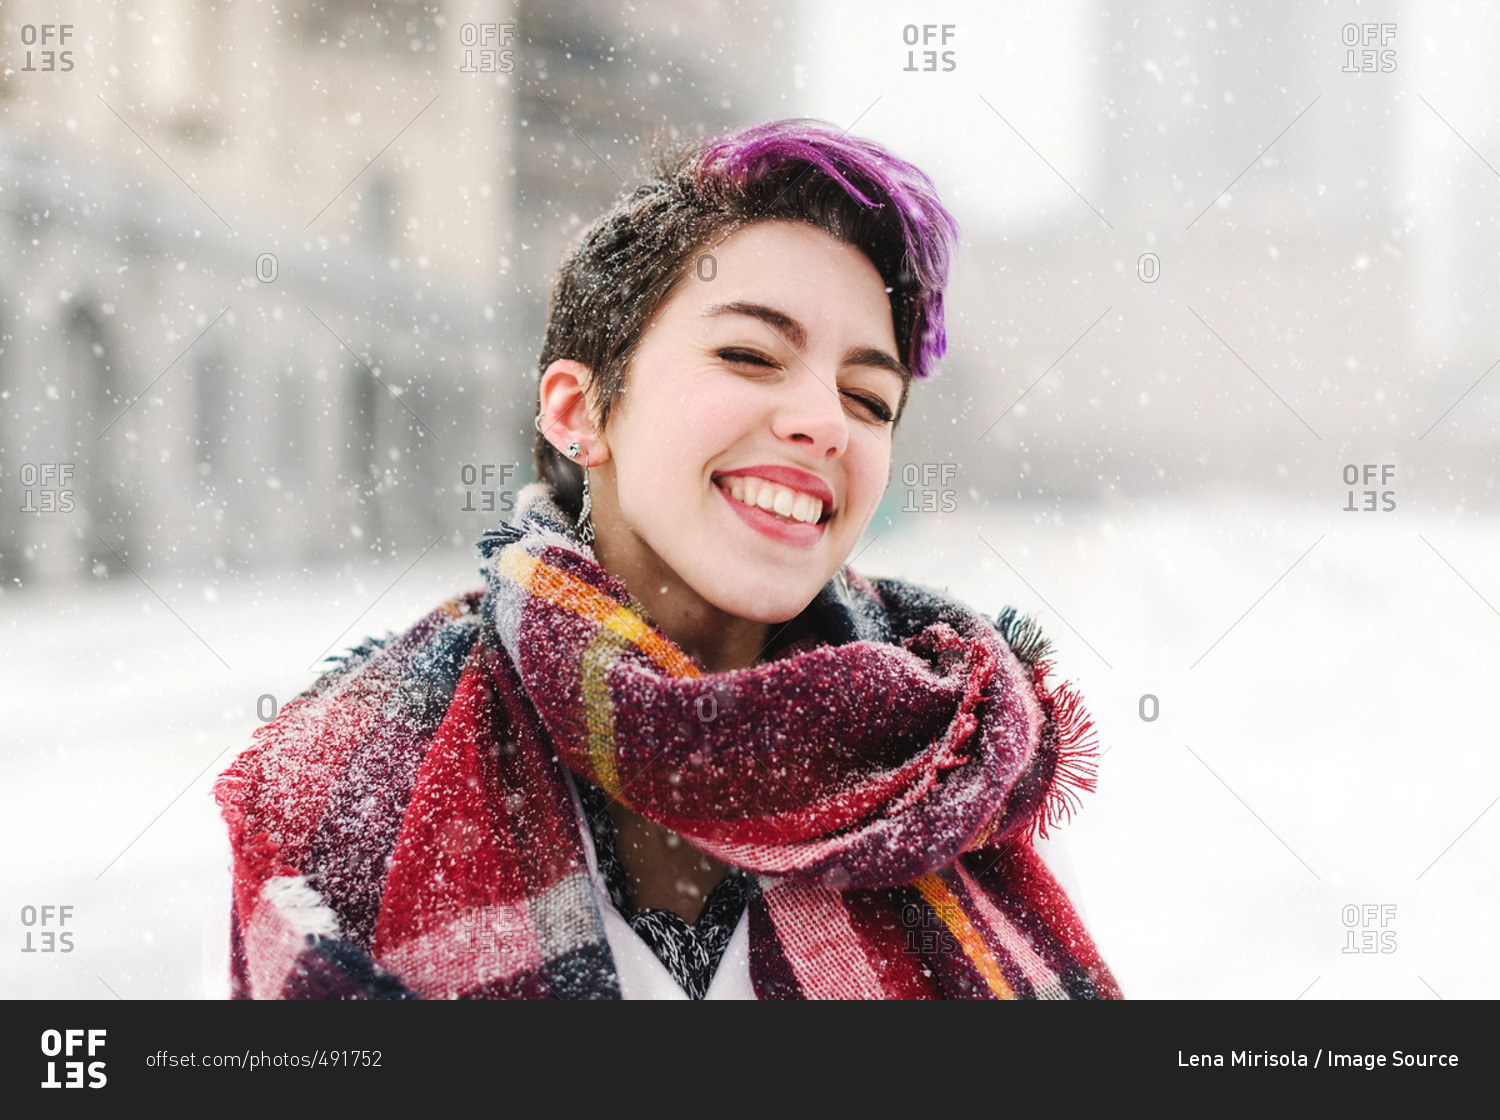 Portrait of young woman standing in front of the Christian Science Centre and Prudential building with snow, Boston, Massachusetts, USA